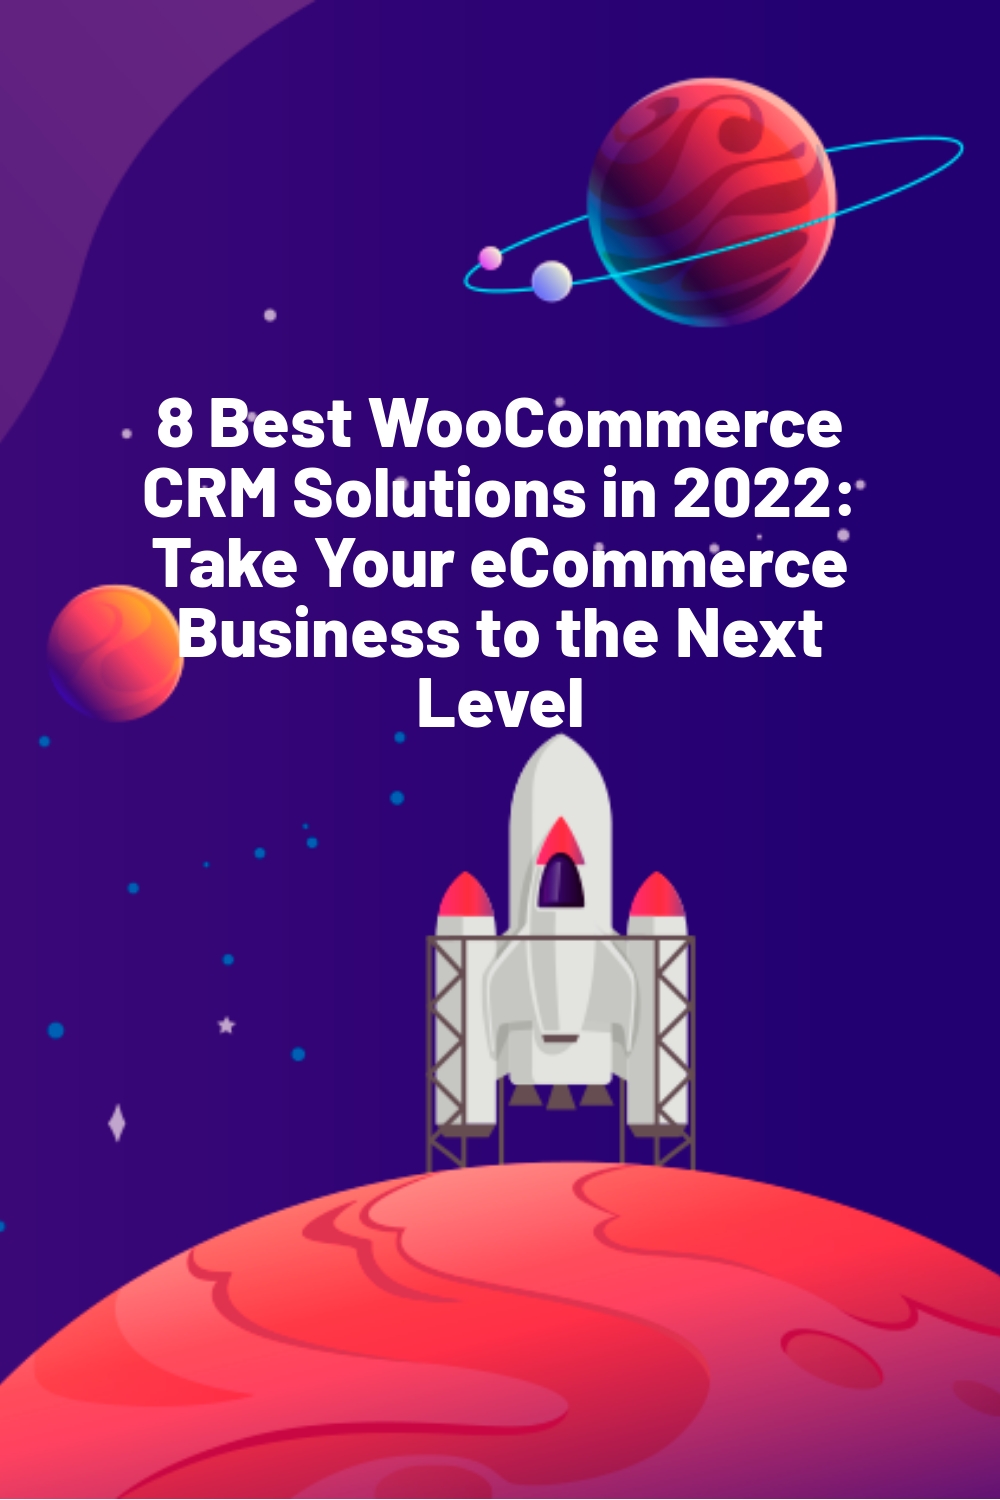 8 Best WooCommerce CRM Solutions in 2022: Take Your eCommerce Business to the Next Level